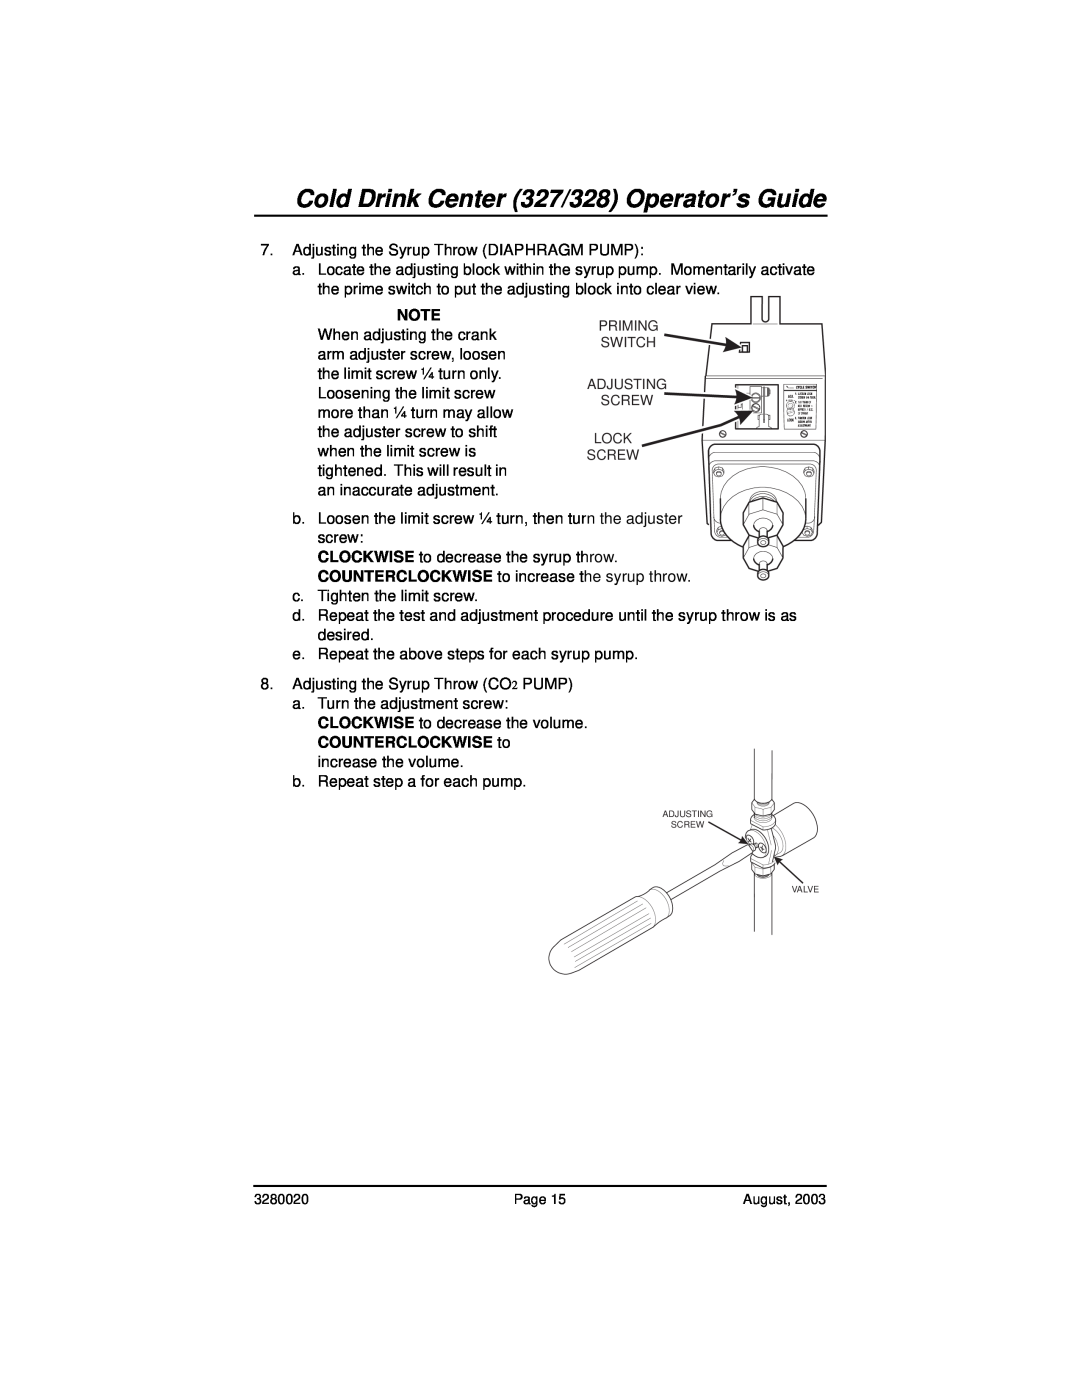 Everpure 325 manual Cold Drink Center 327/328 Operator’s Guide, Adjusting the Syrup Throw DIAPHRAGM PUMP 